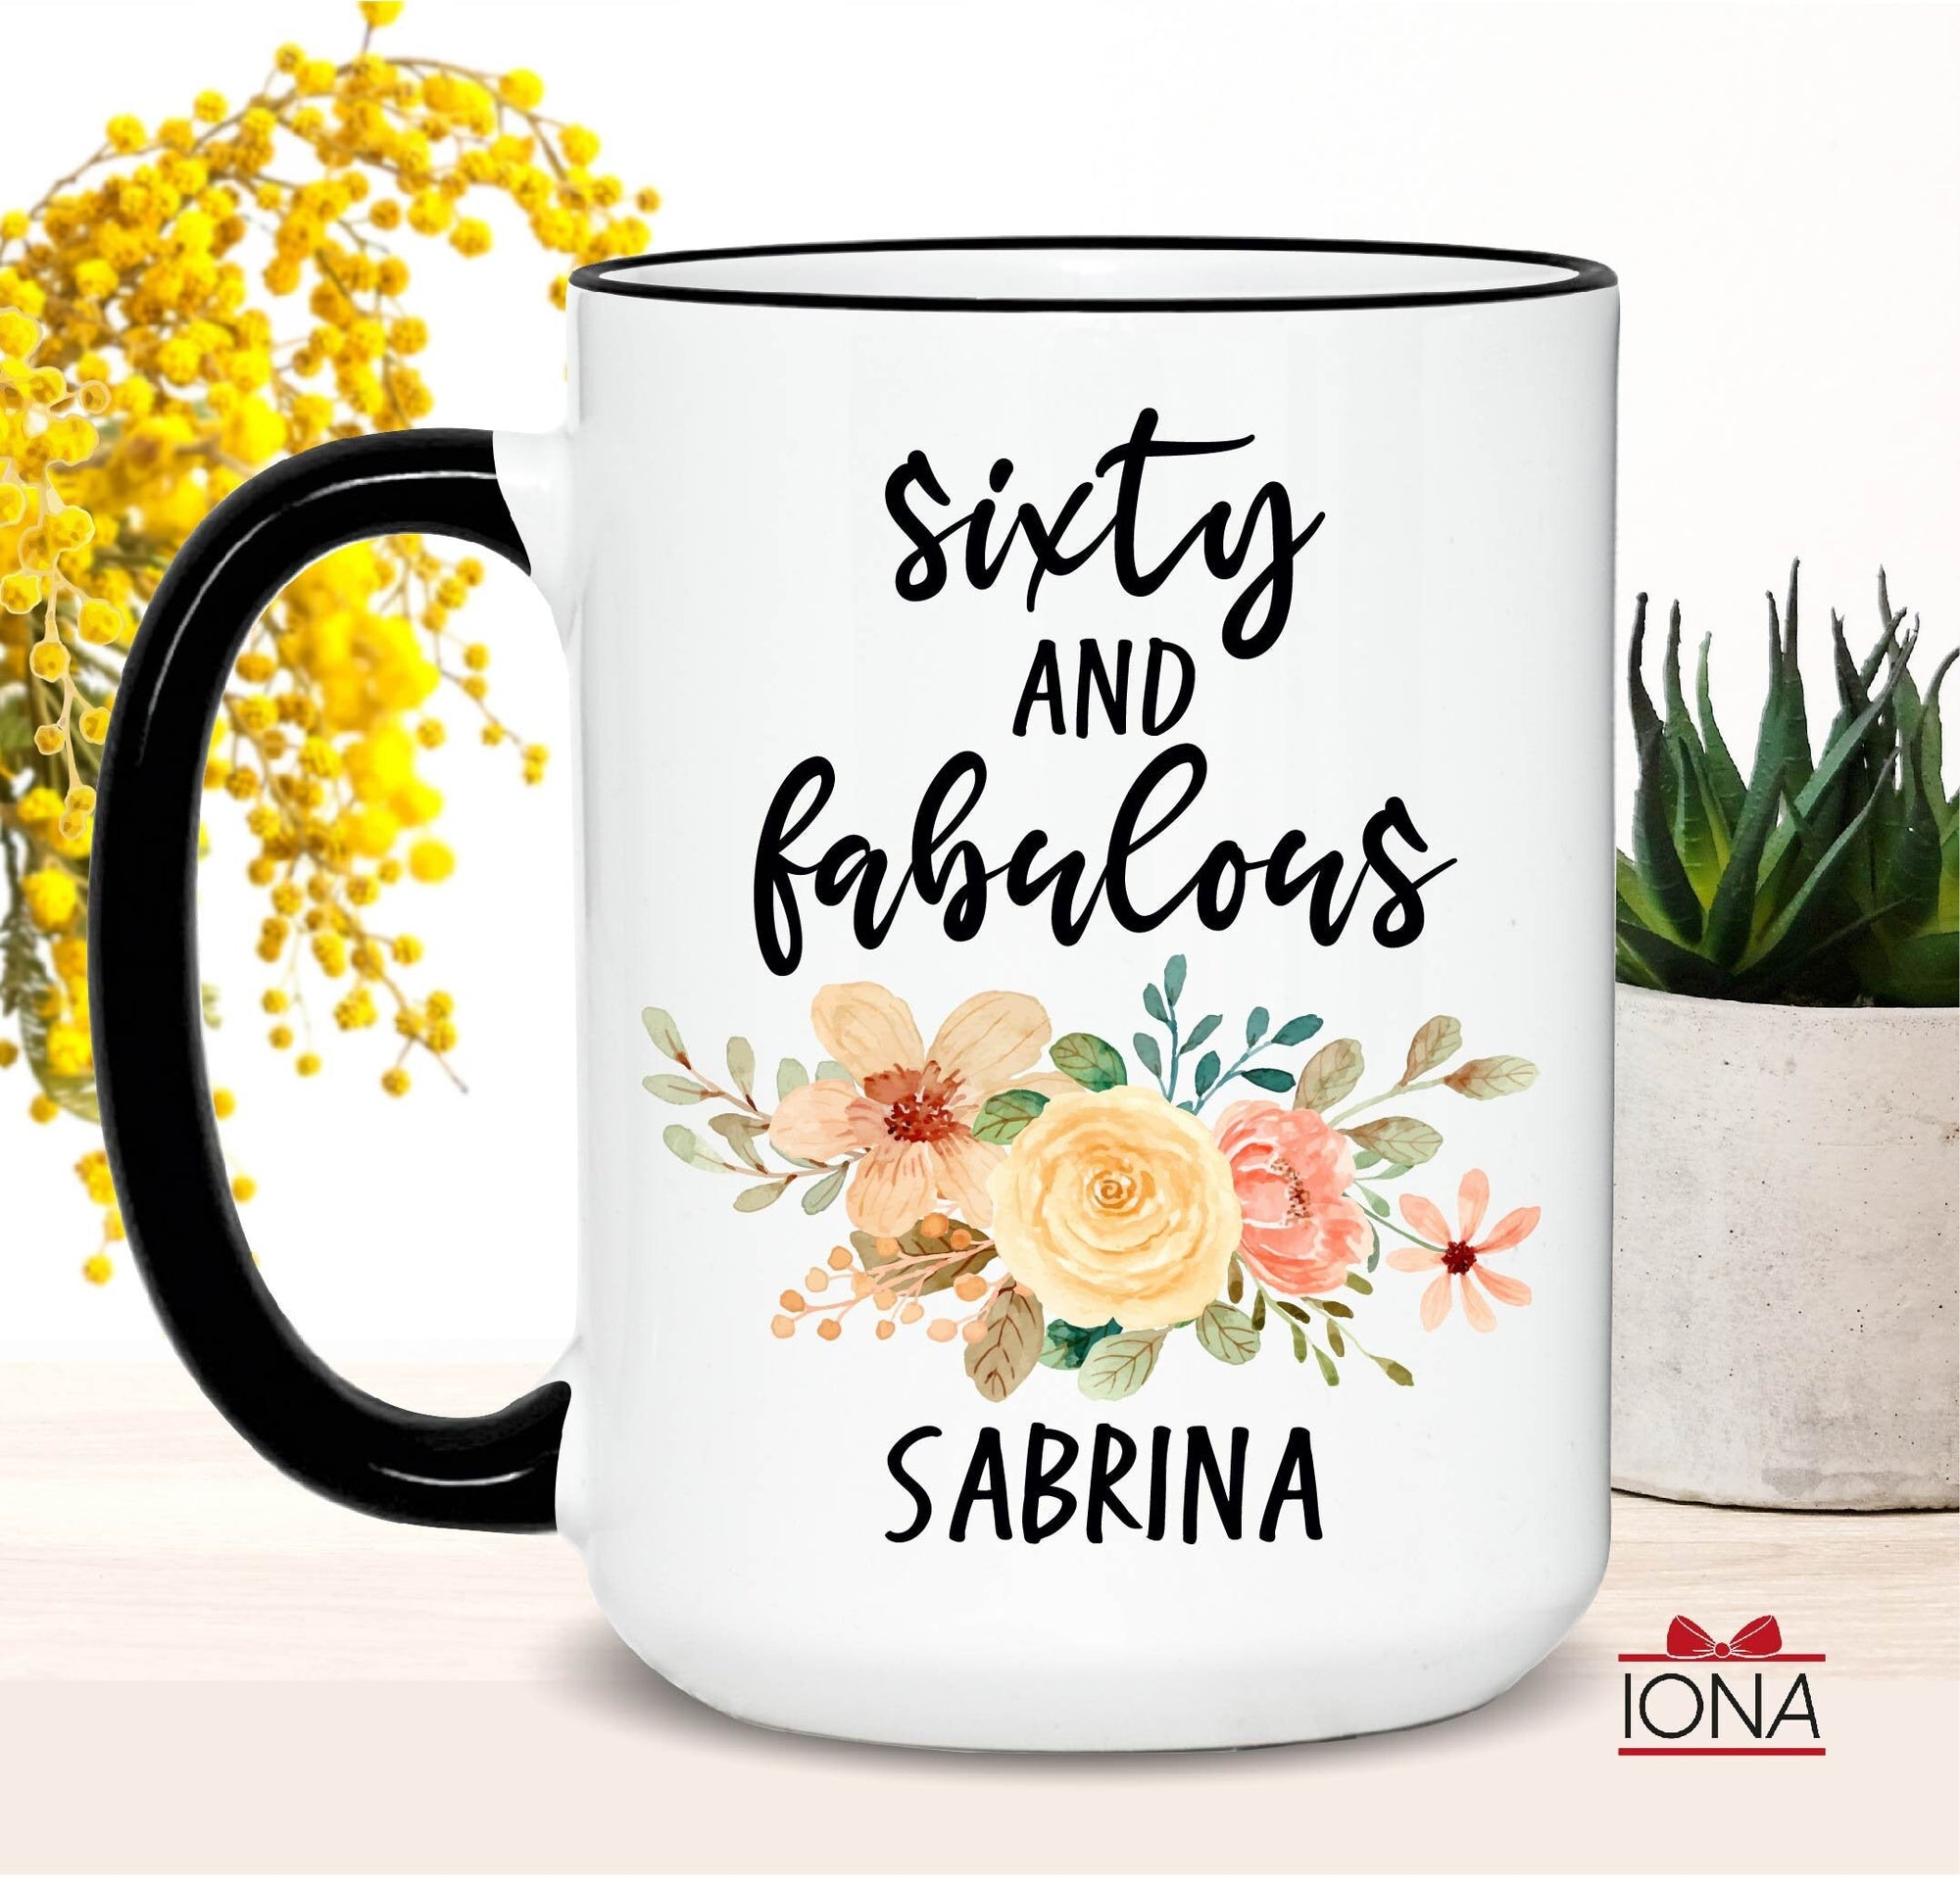 Sixty and Fabulous, 60th Birthday Gift, Personalized 60th Birthday Coffee Mug, Born in 1964, birthday gifts for women ideas 60 years old